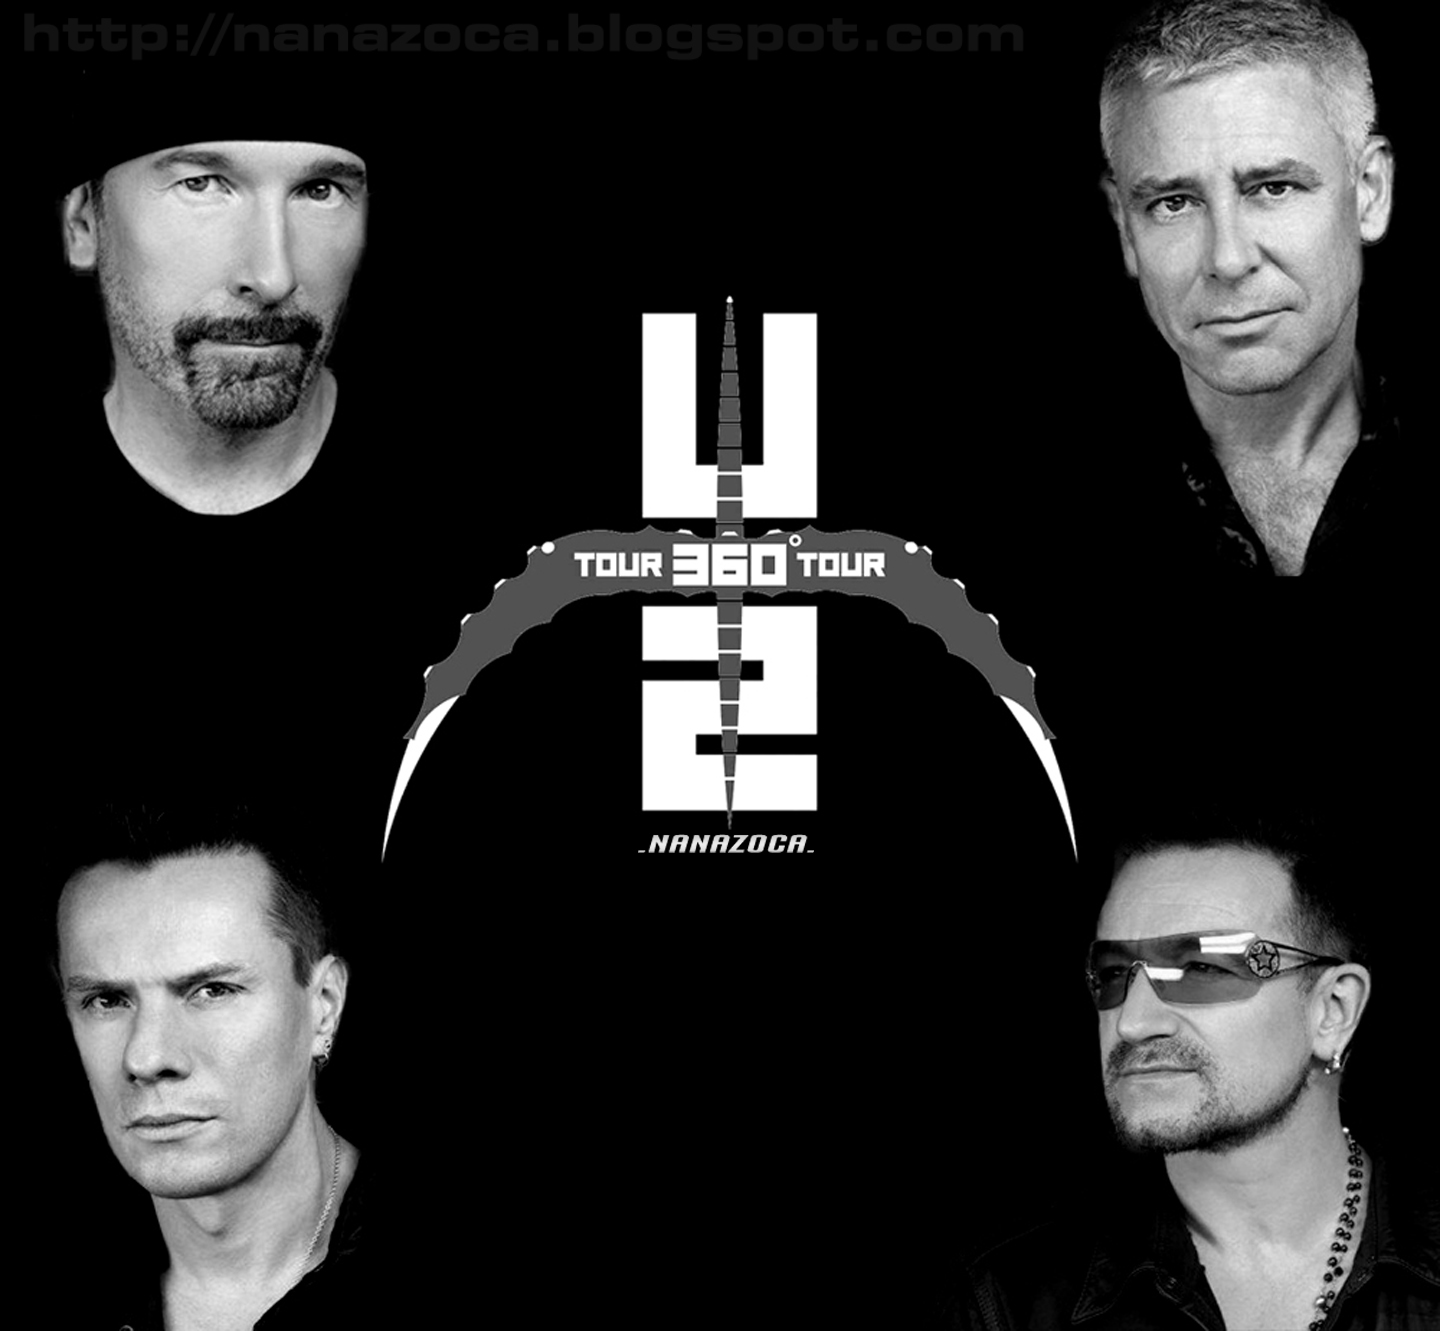 U2 - Irish Rock Band in Dublin - Some of the World’s Best-Selling Artists